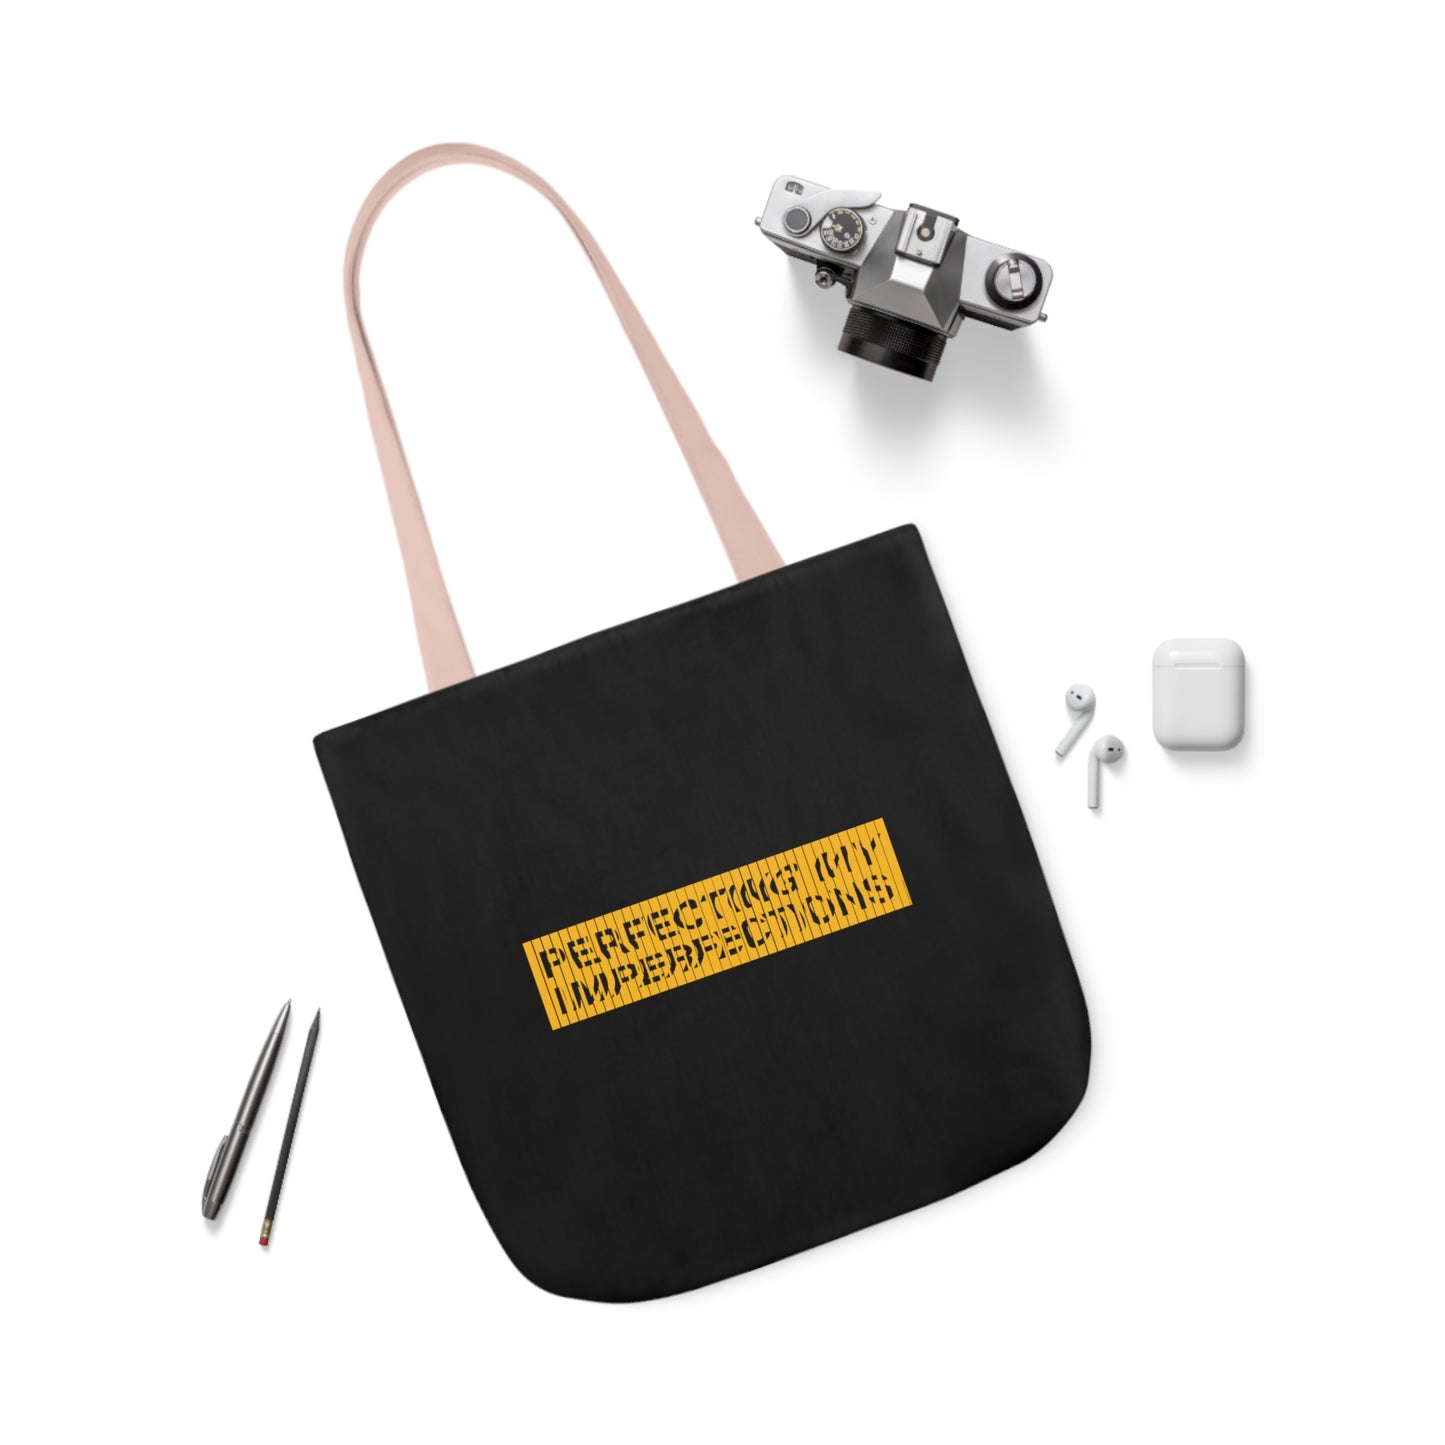 Perfecting My Imperfections Canvas Tote Bag